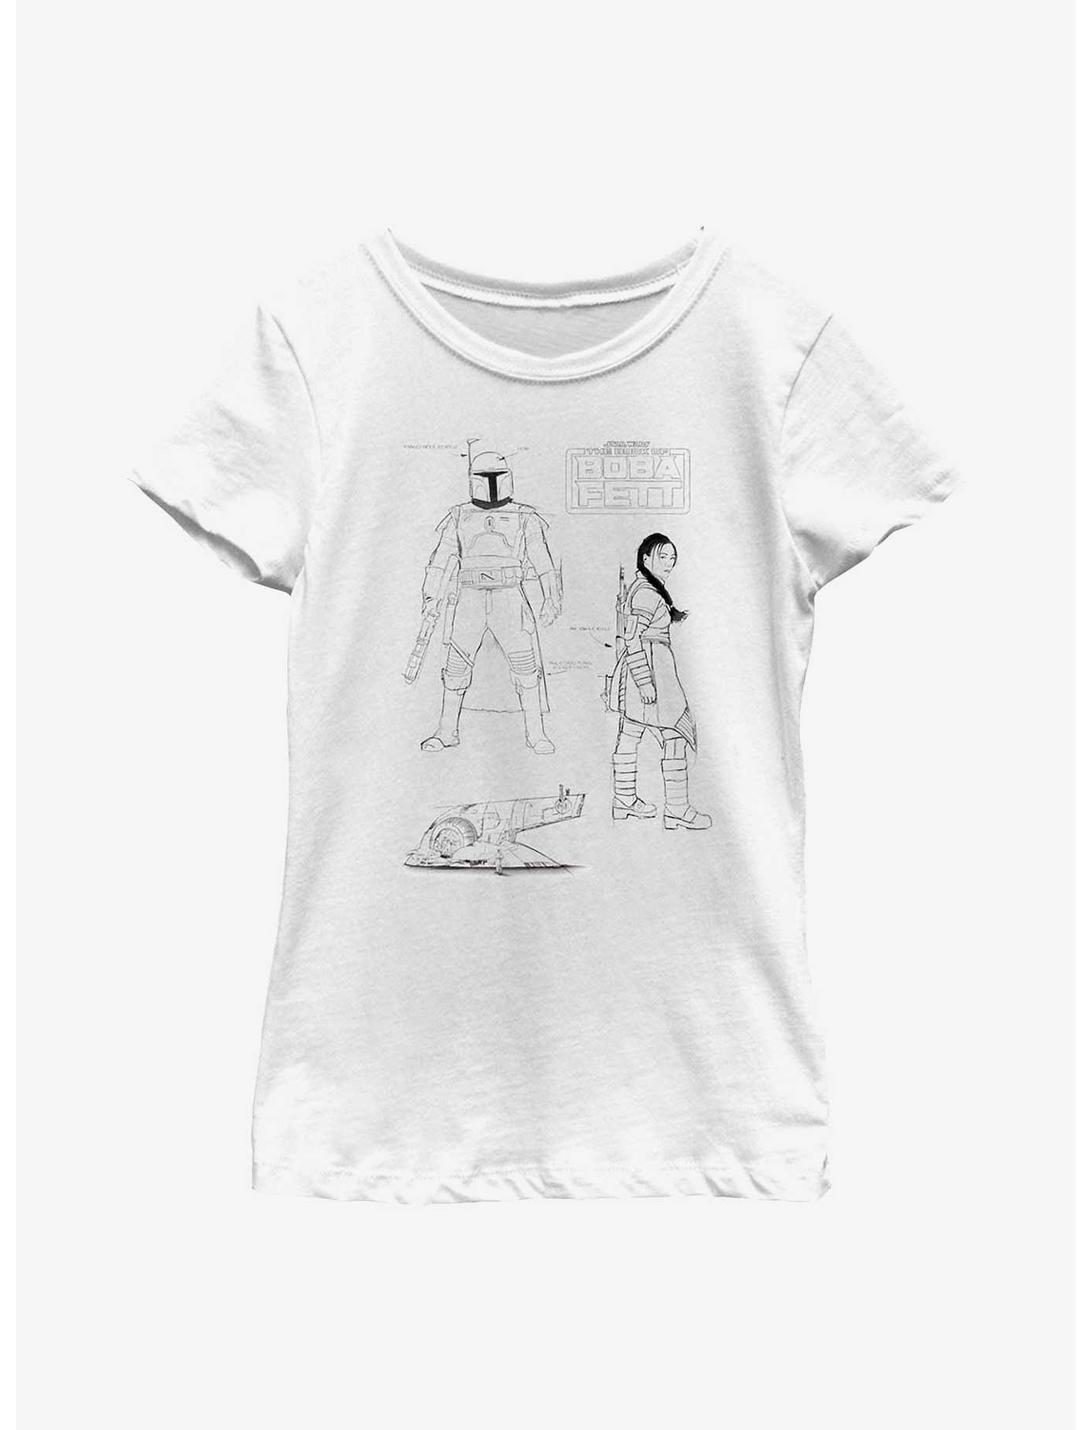 Star Wars: The Book Of Boba Fett Textbook Sketches Youth Girls T-Shirt, WHITE, hi-res